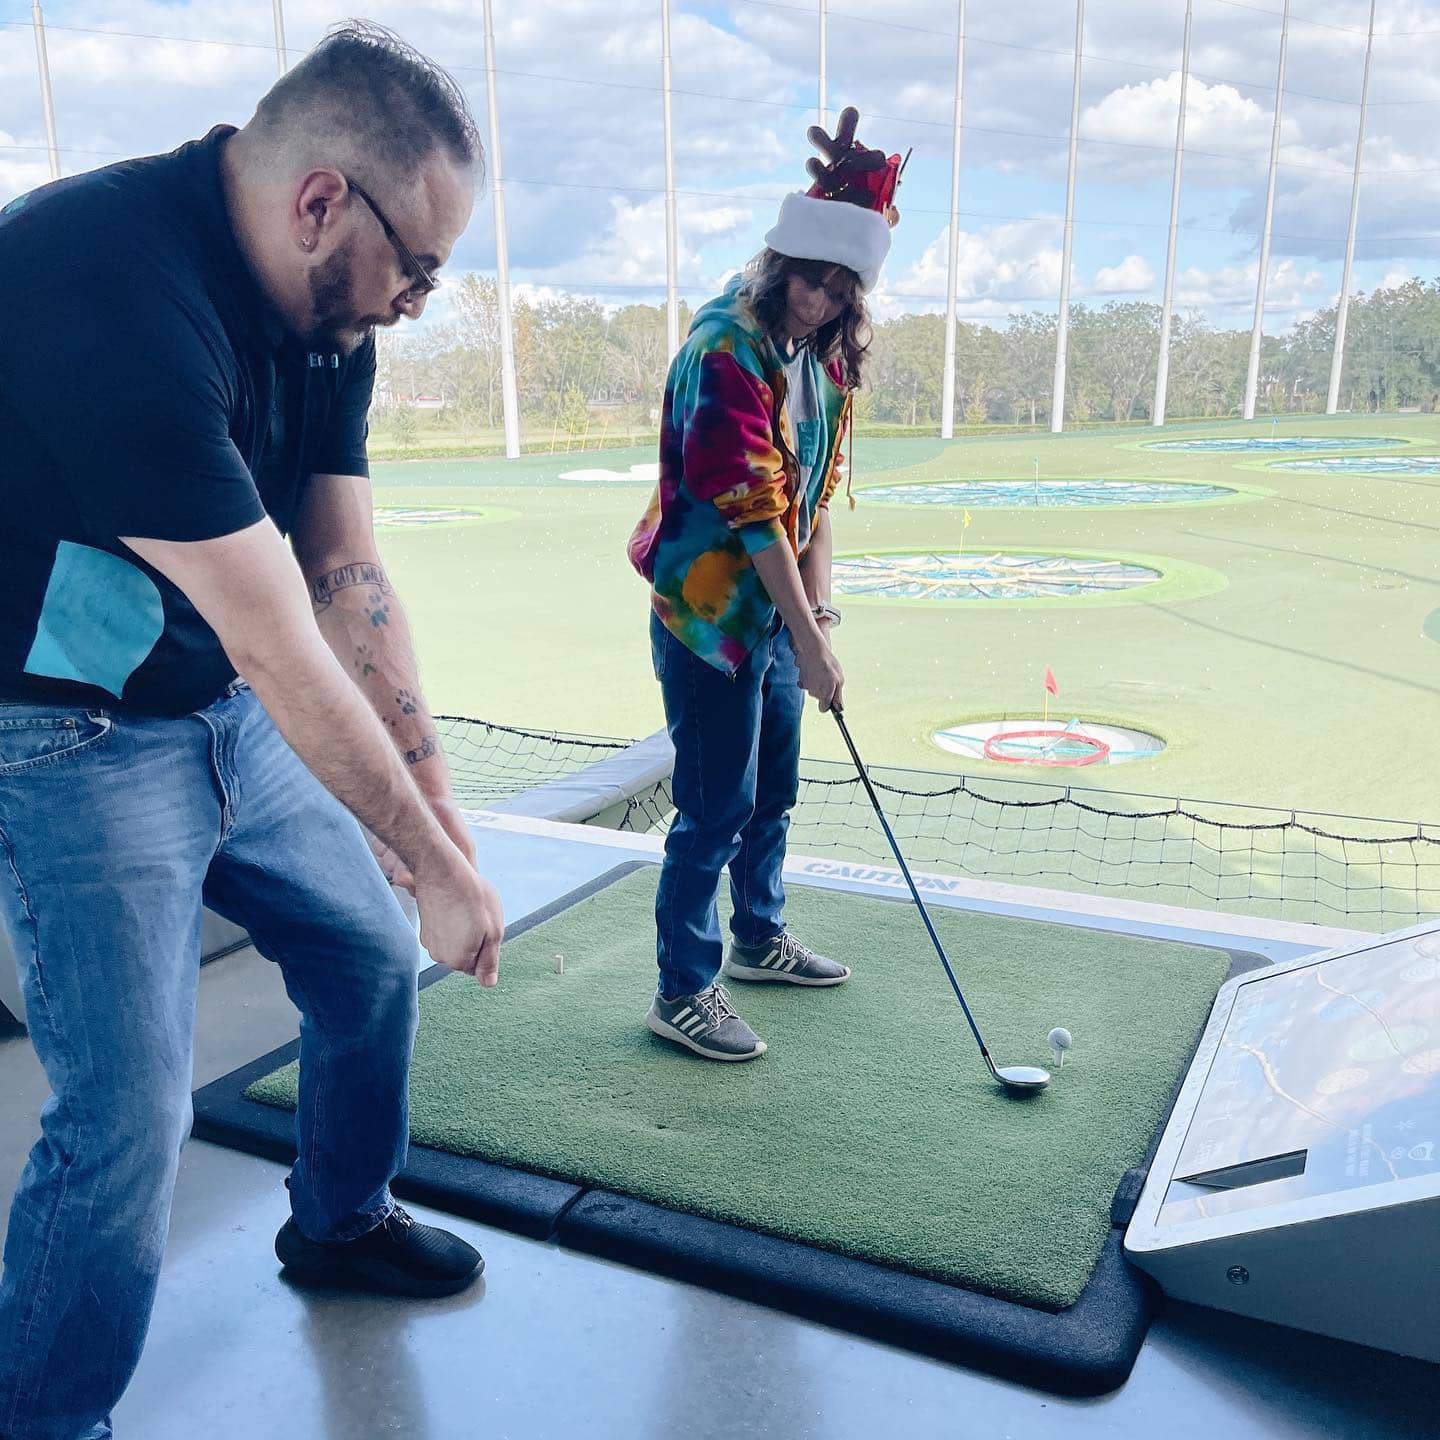 ActivEngage team member learns how to golf